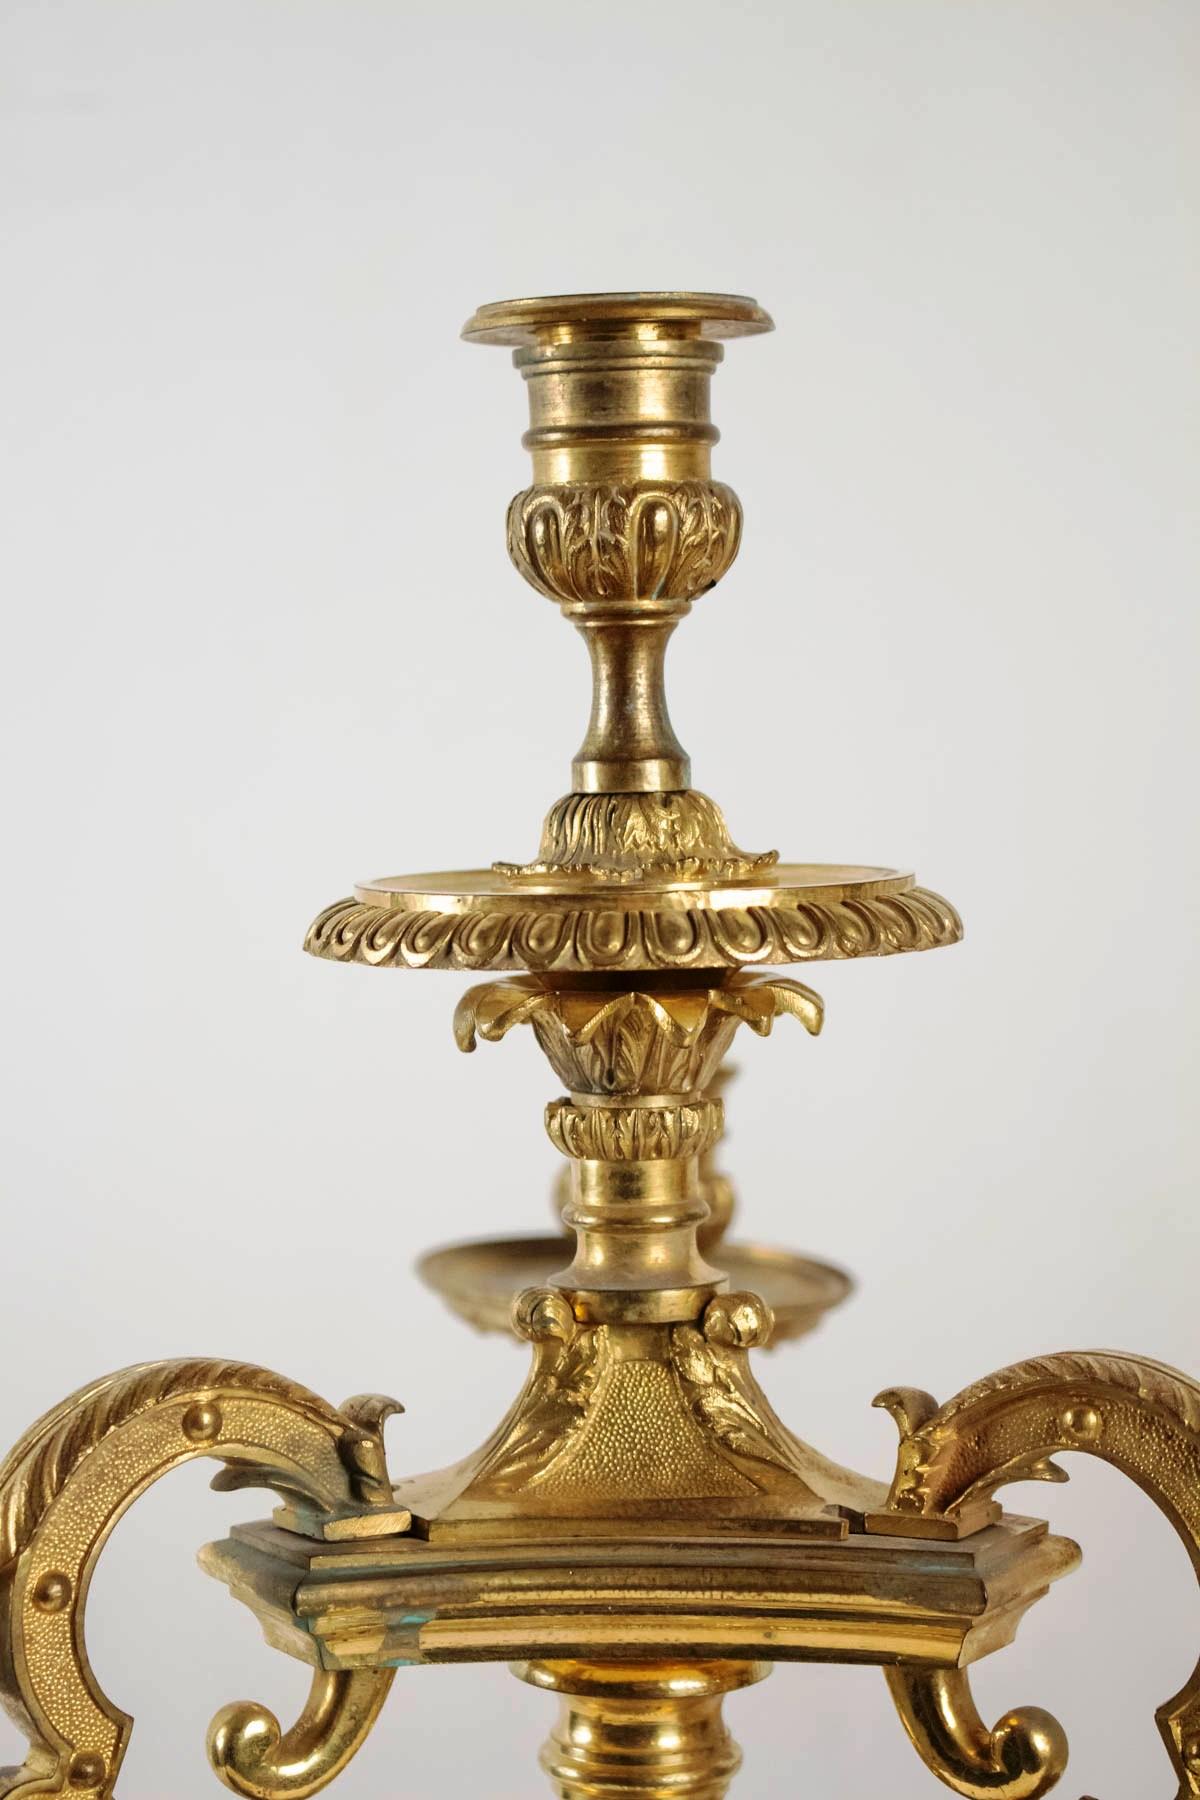 Rare Pair of Gilt Bronze Candelabras, after A-C Boulle France, Late 19th Century (Régence)